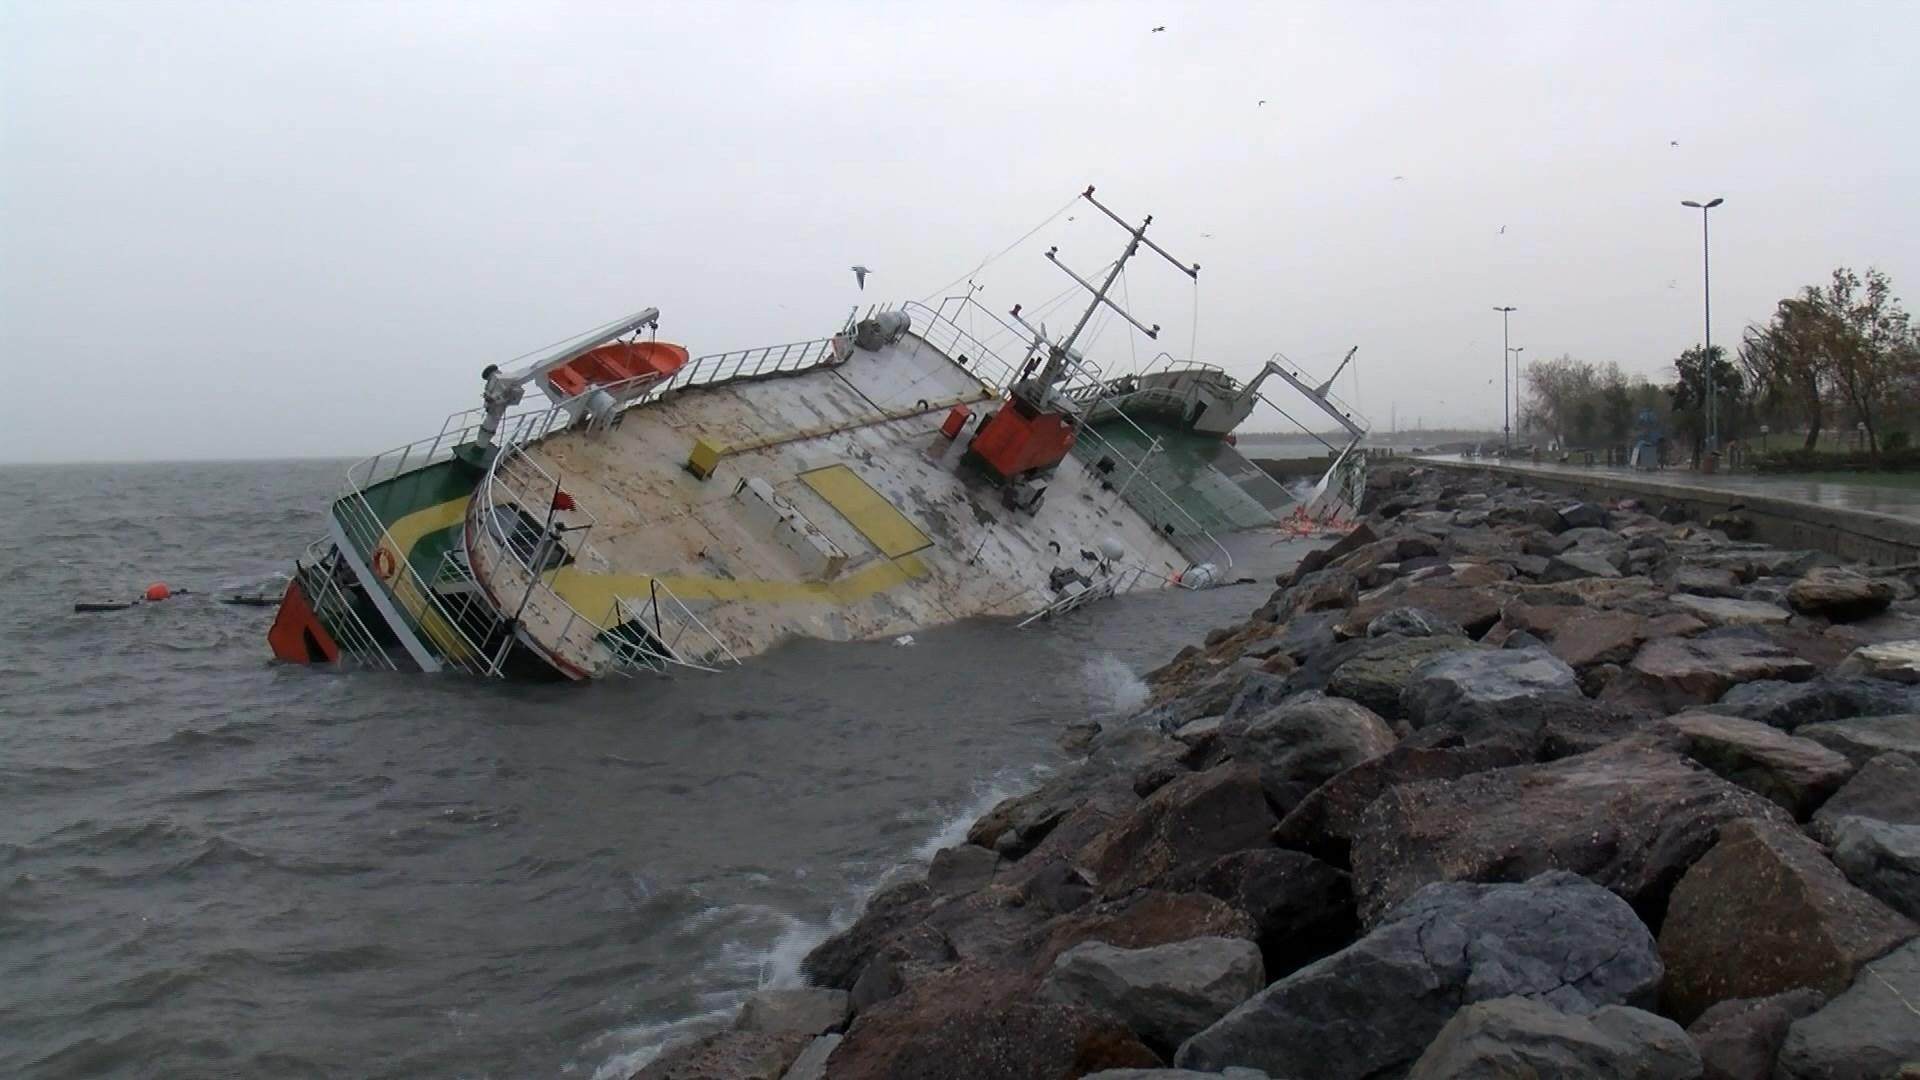 The ship that washed ashore due to the storm sank on the Maltepe coast